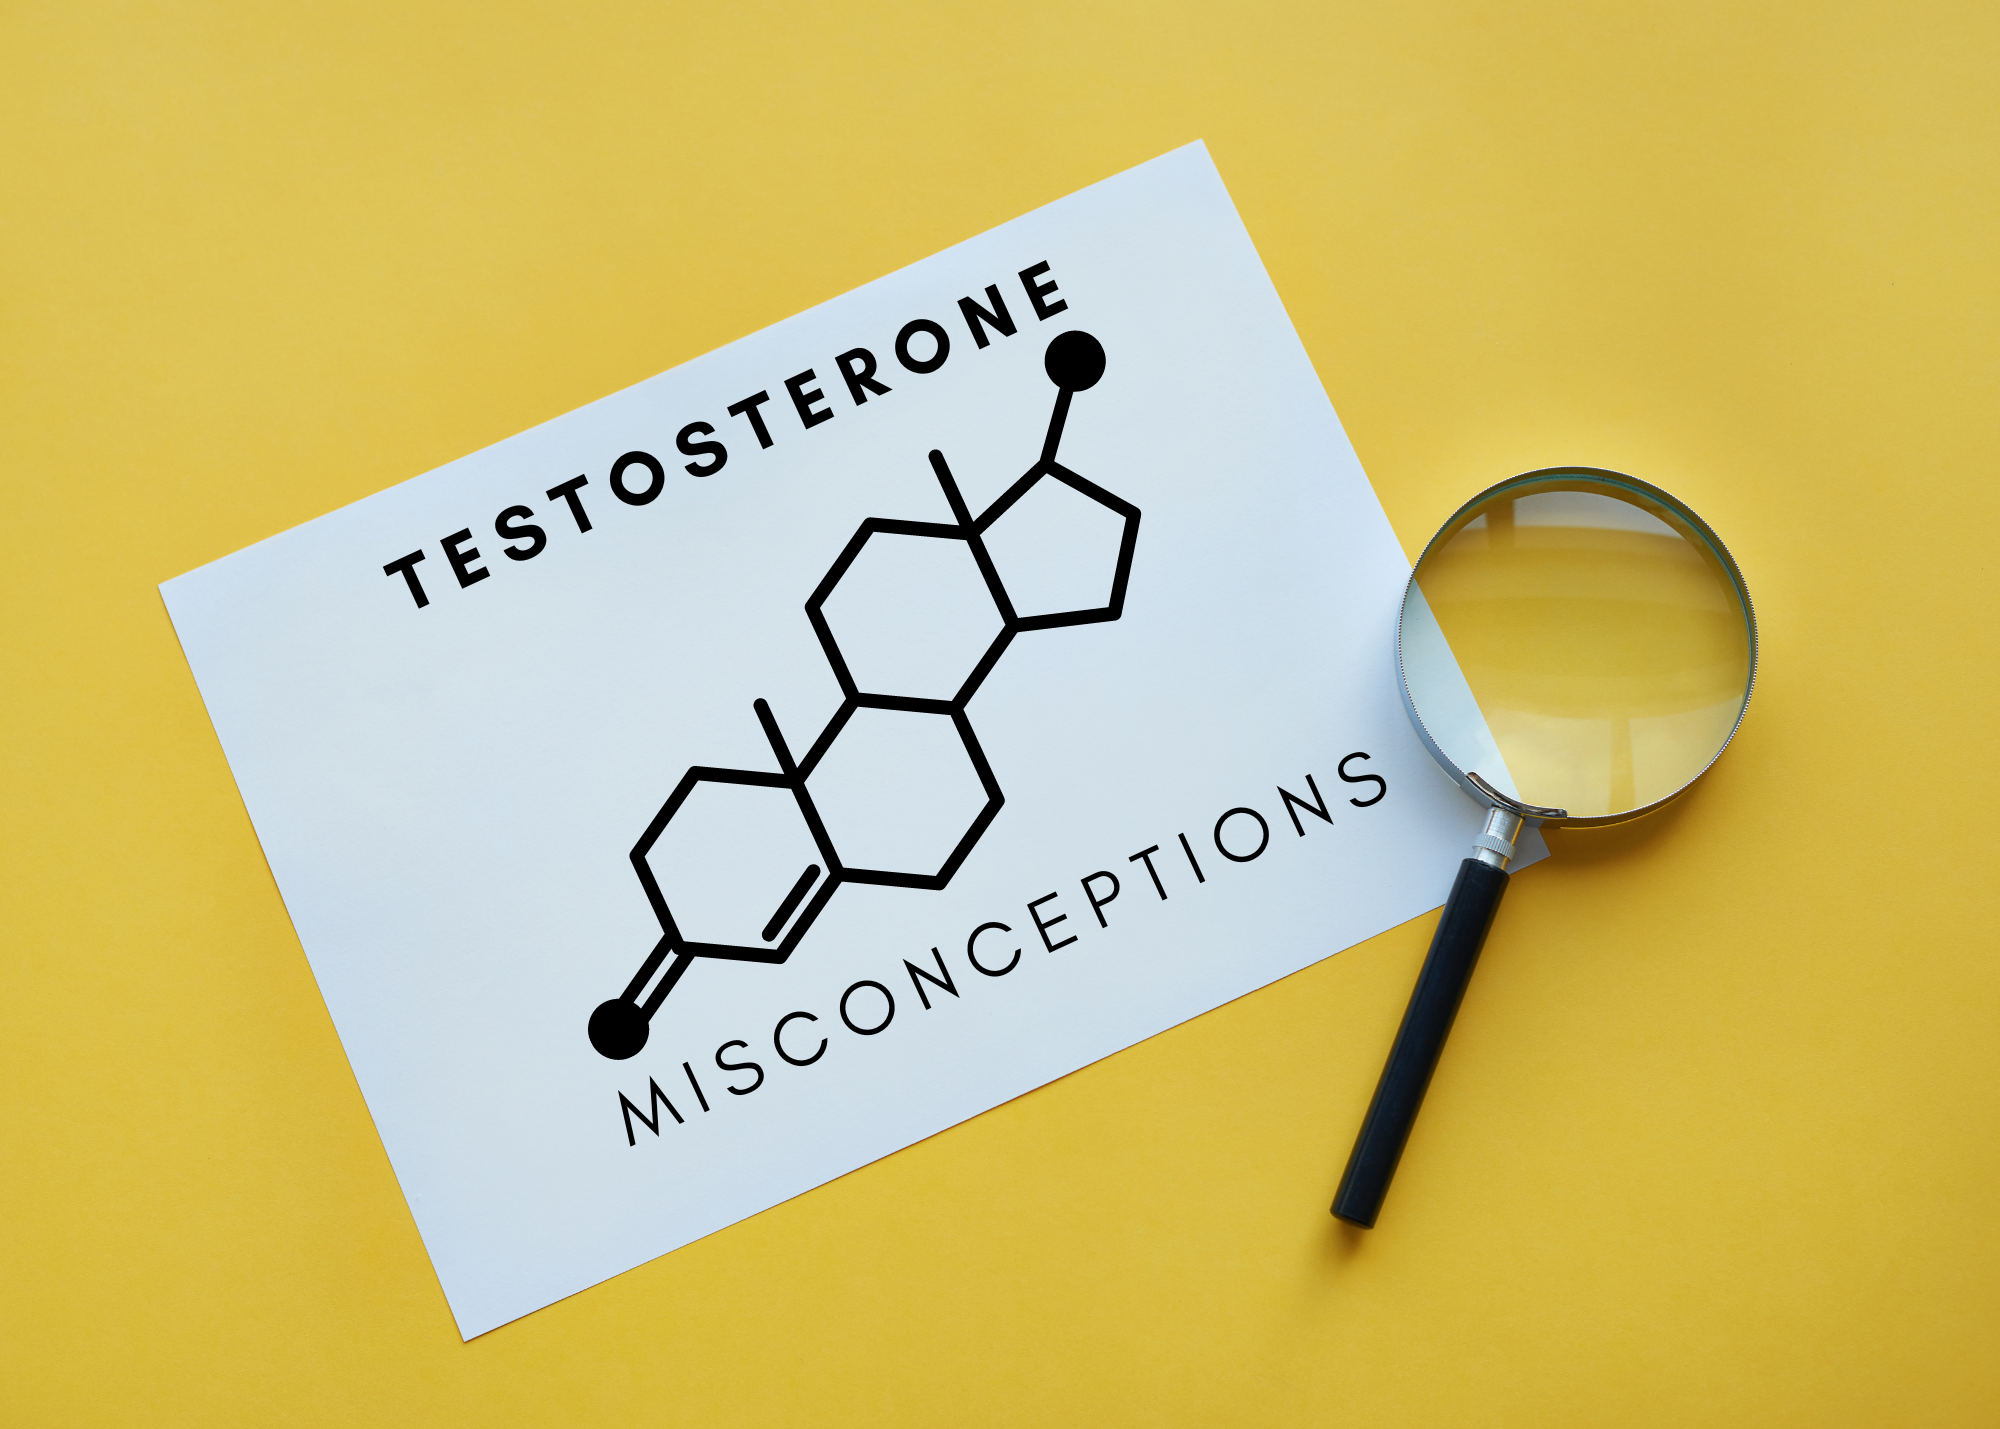 Testosterone misconceptions